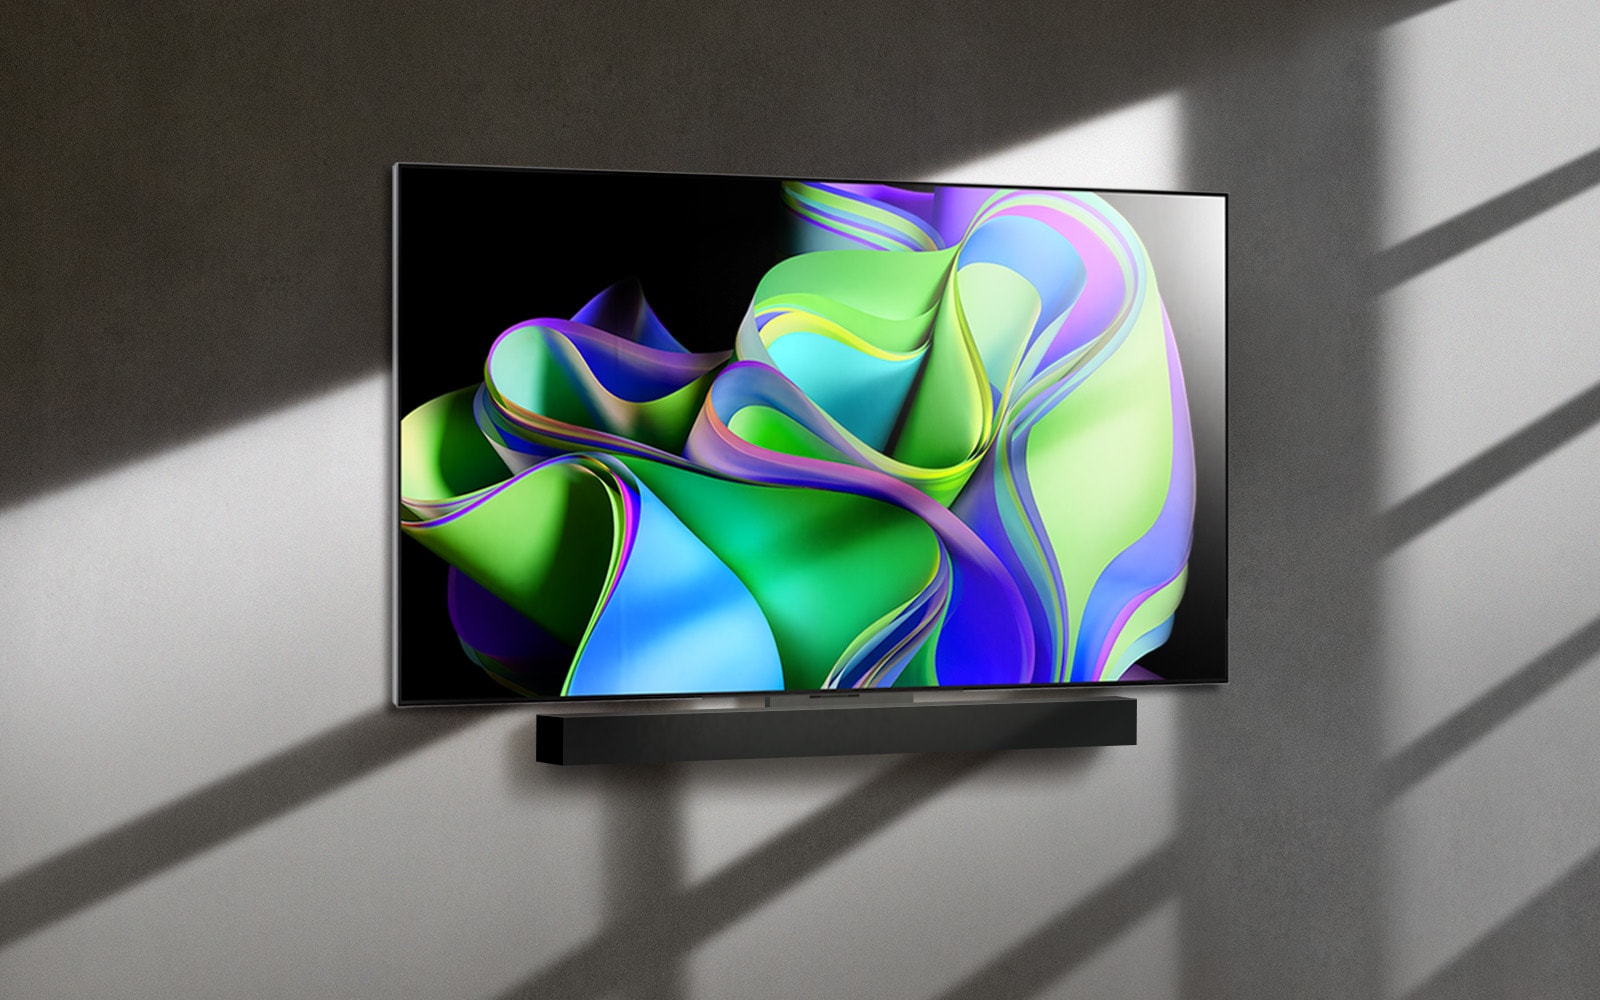 A video opens with the words LG OLED evo against a black background. The words enlargen and fill with color. Then the scene transitions to LG OLED C3, showing a colorful abstract artwork with a Soundbar against a white background. The white background becomes a wall in a room to which the TV attaches. 